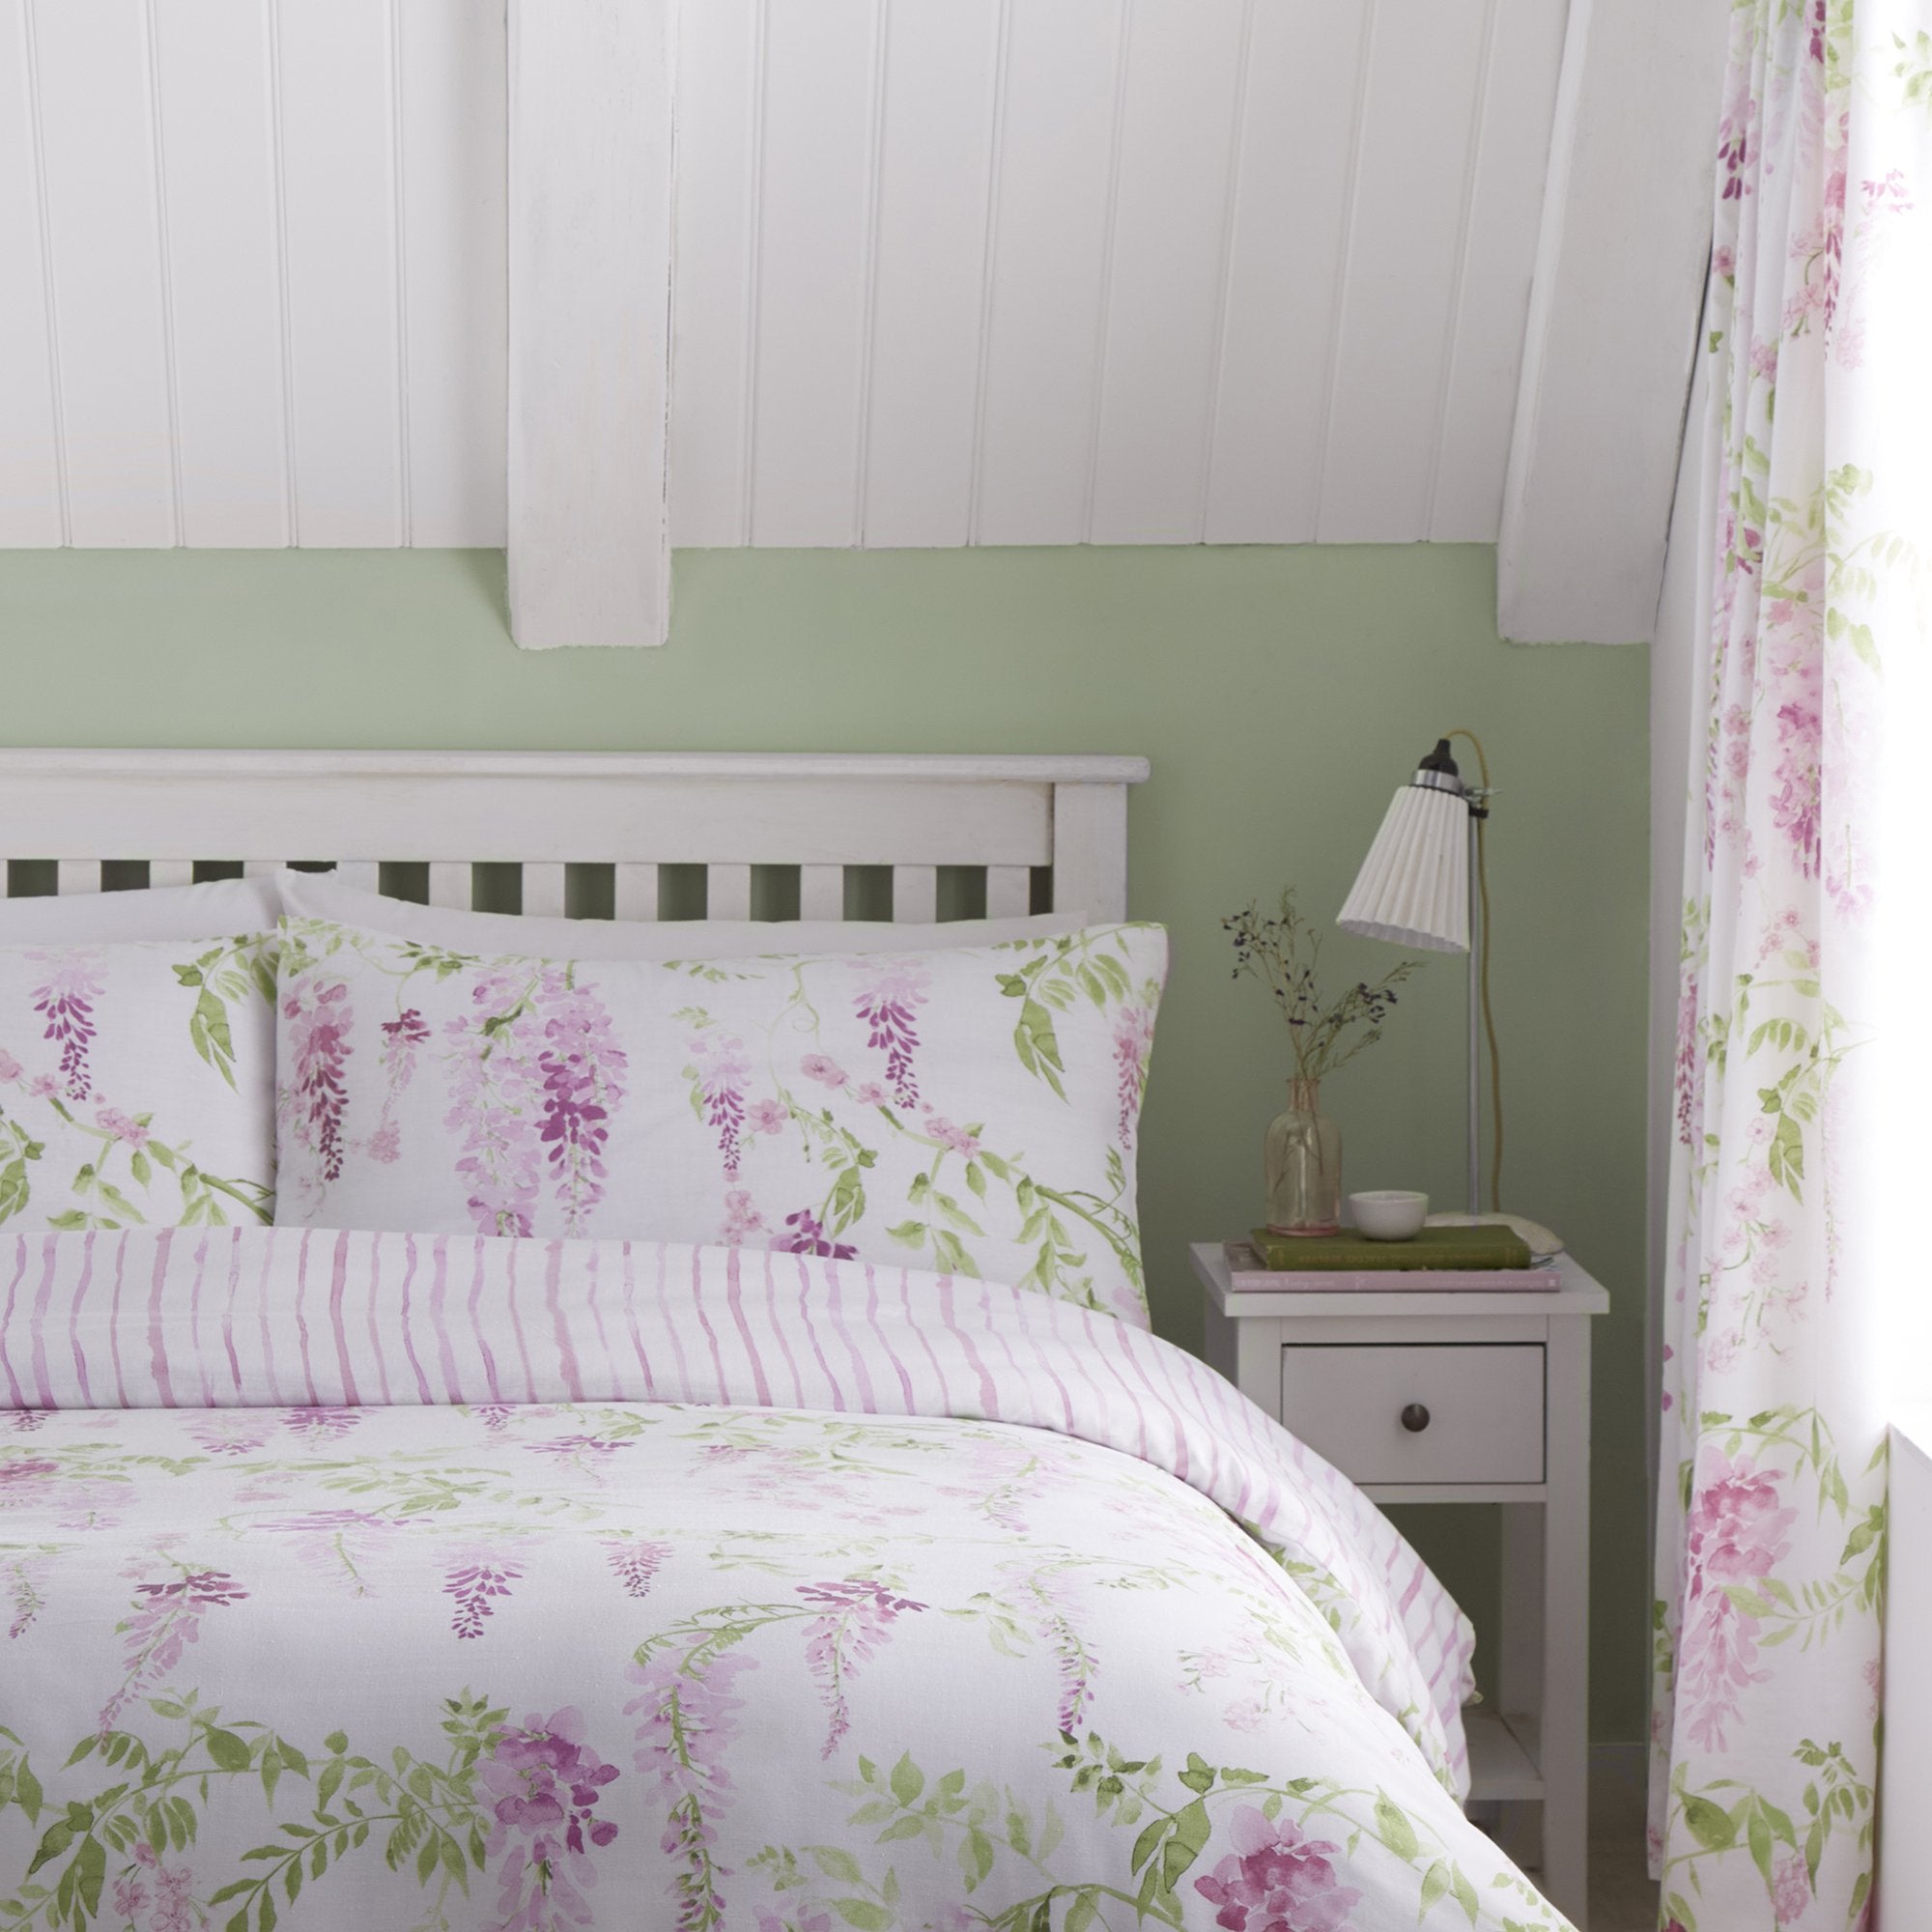 Duvet Cover Set Wisteria by Dreams & Drapes Design in Pink